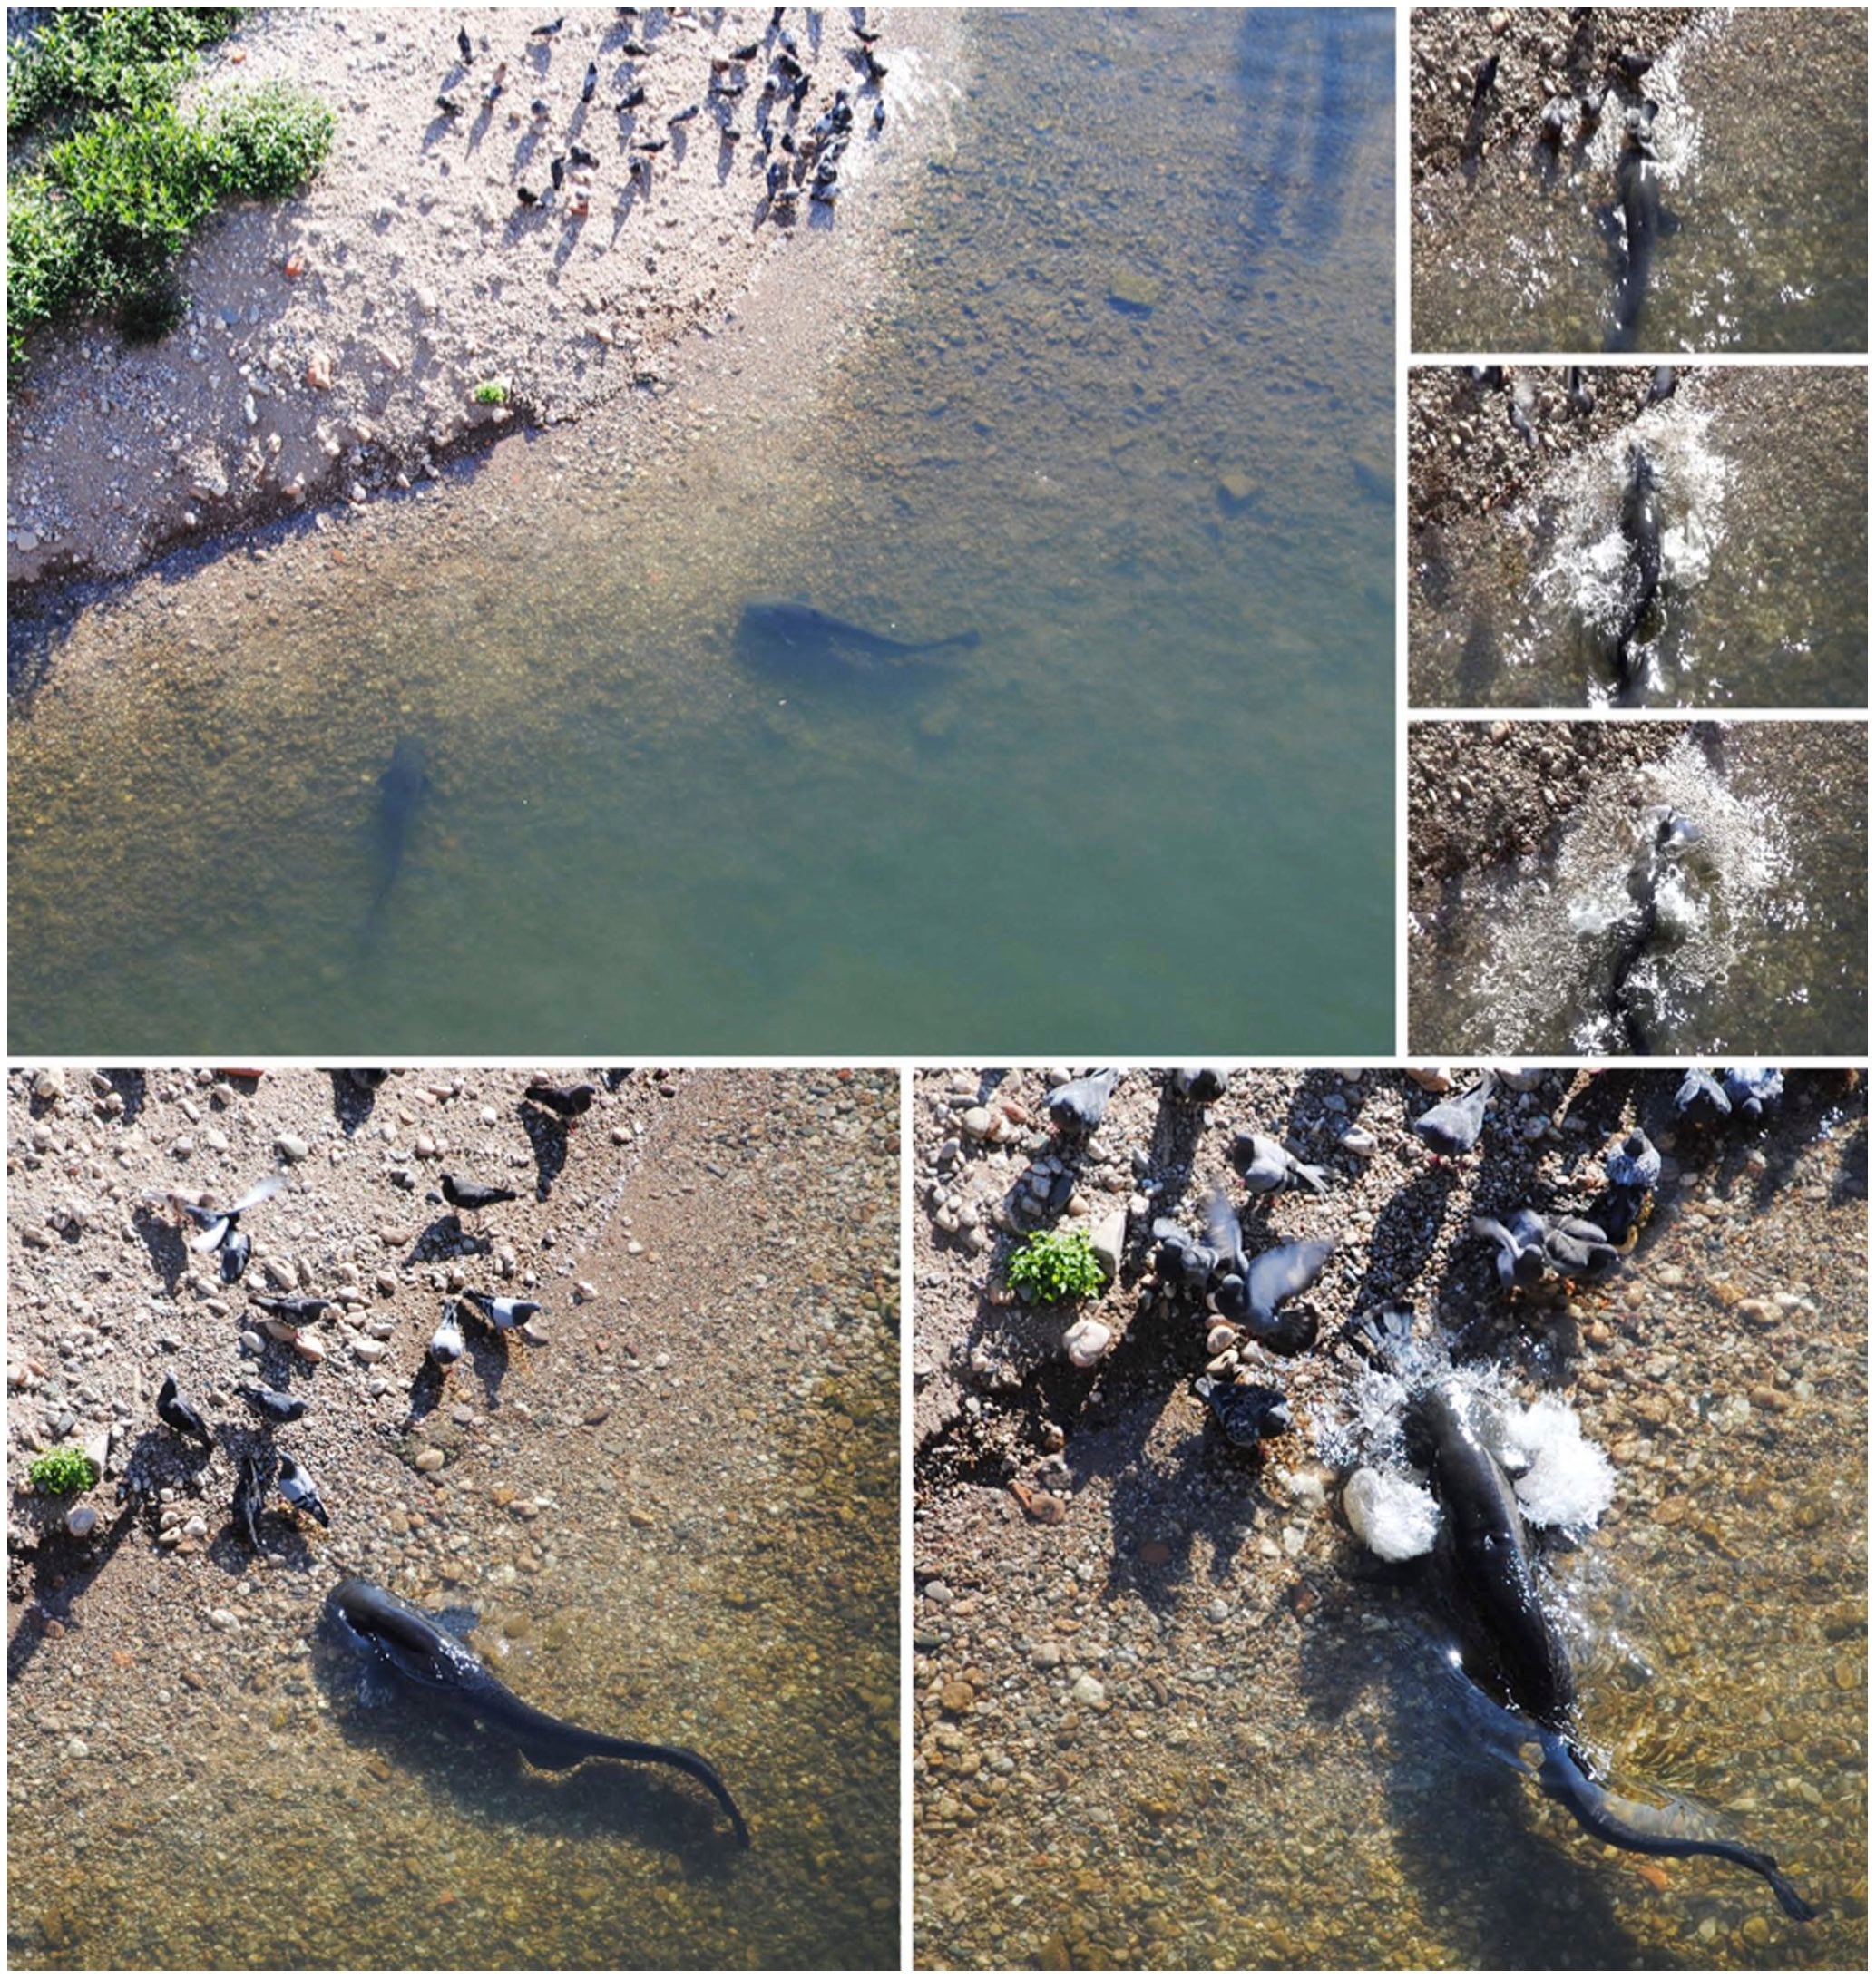 European catfish exhibit beach behavior to catch land birds.  A few individuals were observed swimming near the gravel beach in shallow water where the pigeons regroup to drink and clean (large photo).  An individual is seen approaching ground birds and beaching itself to successfully catch one (small pictures).